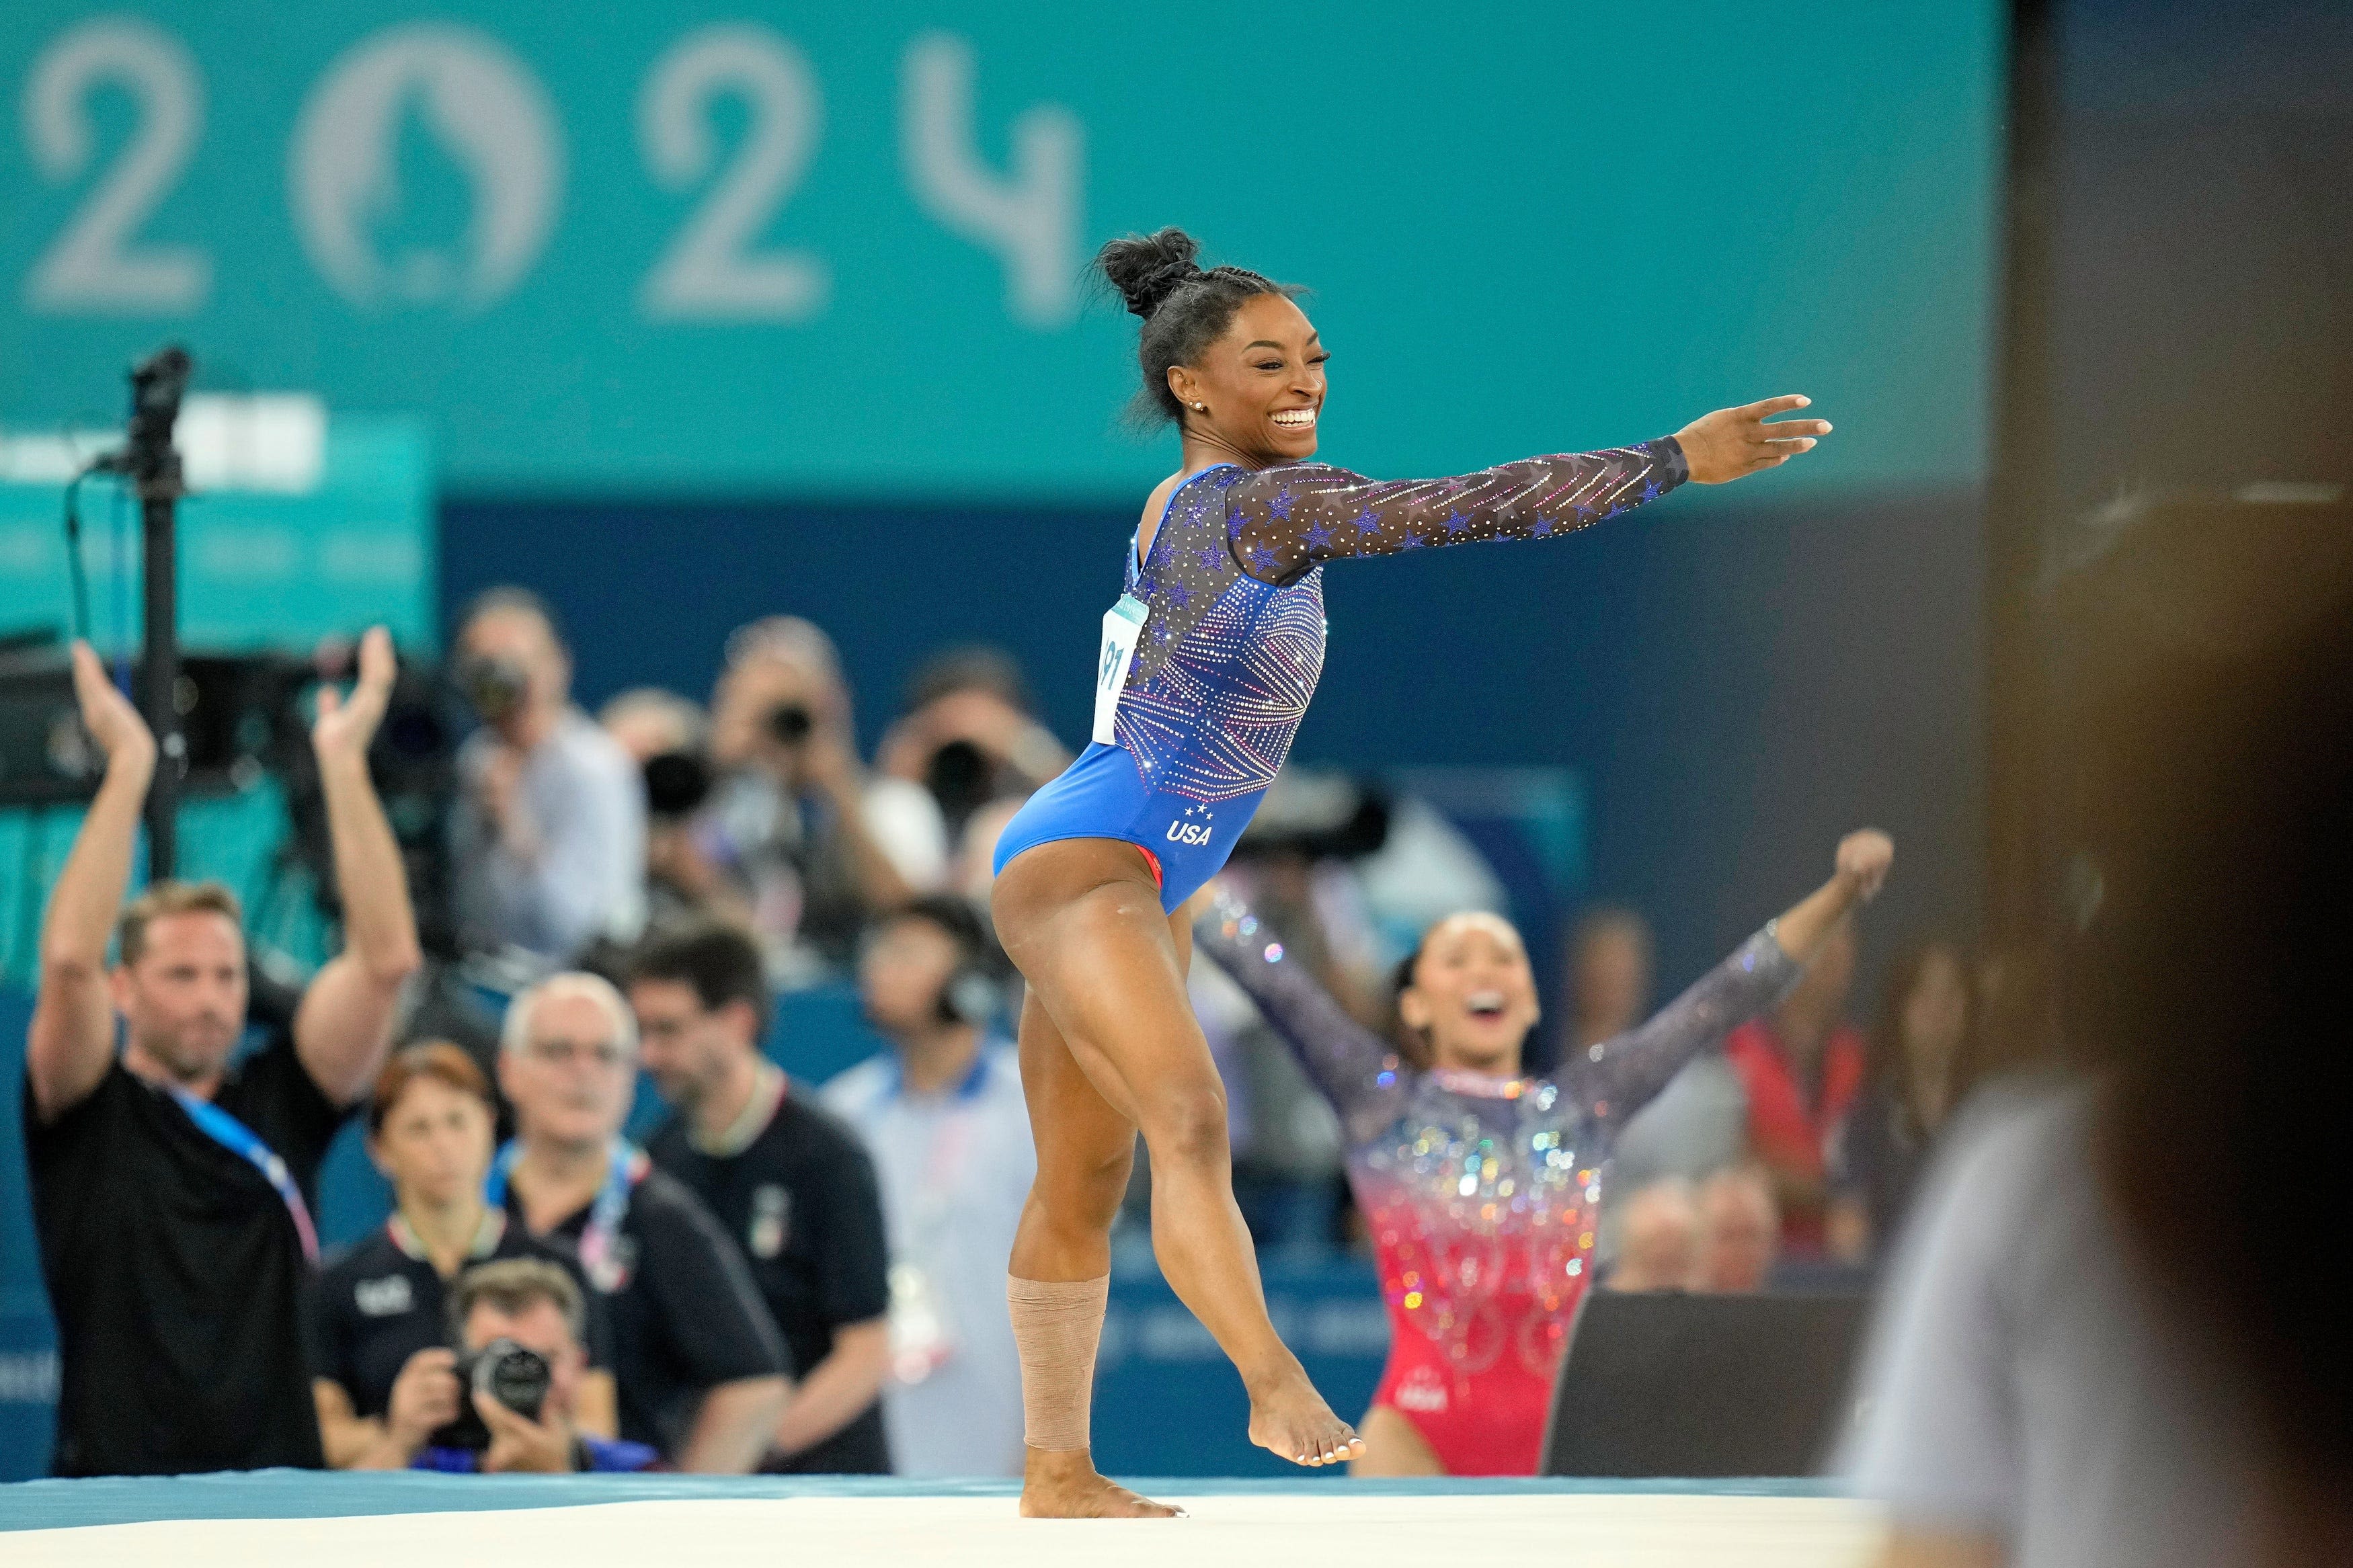 Olympic gymnastics highlights: Simone Biles wins gold medal in all-around